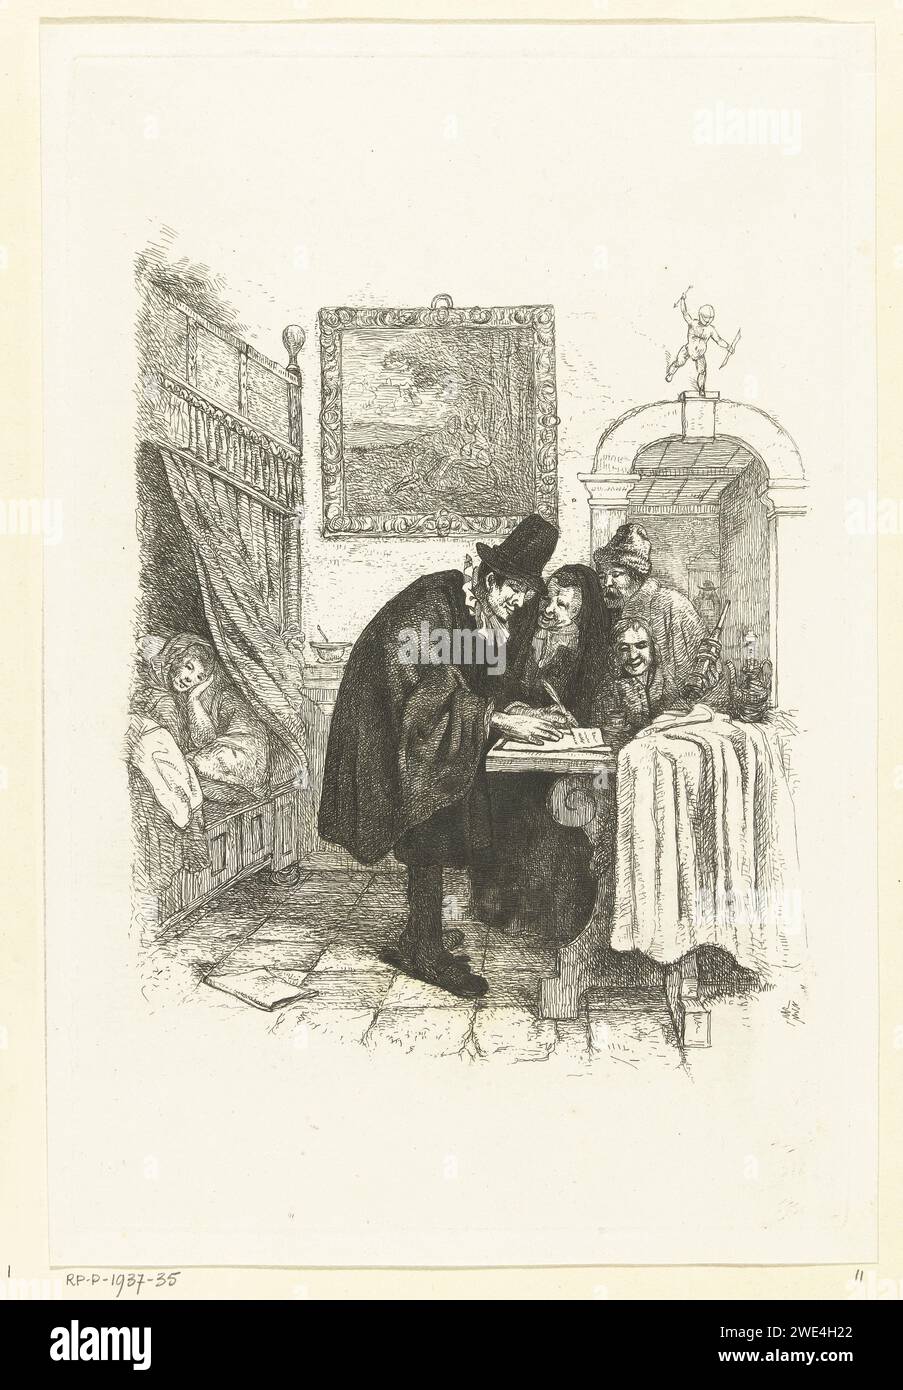 Doctor on a home visit to sick wife, Albertus Brondgeest, After Jan Havicksz. Steen, 1796 - 1849 print A doctor writes a recipe standing at a table. An old woman, a man with a cloud spray and a boy watch. The patient, a sick woman, is in bed. In the interior there is a painting on the wall with a pastoral scene. On top of the bar is a small statue of Amor. Netherlands paper etching sick-bed. physician, doctor Stock Photo